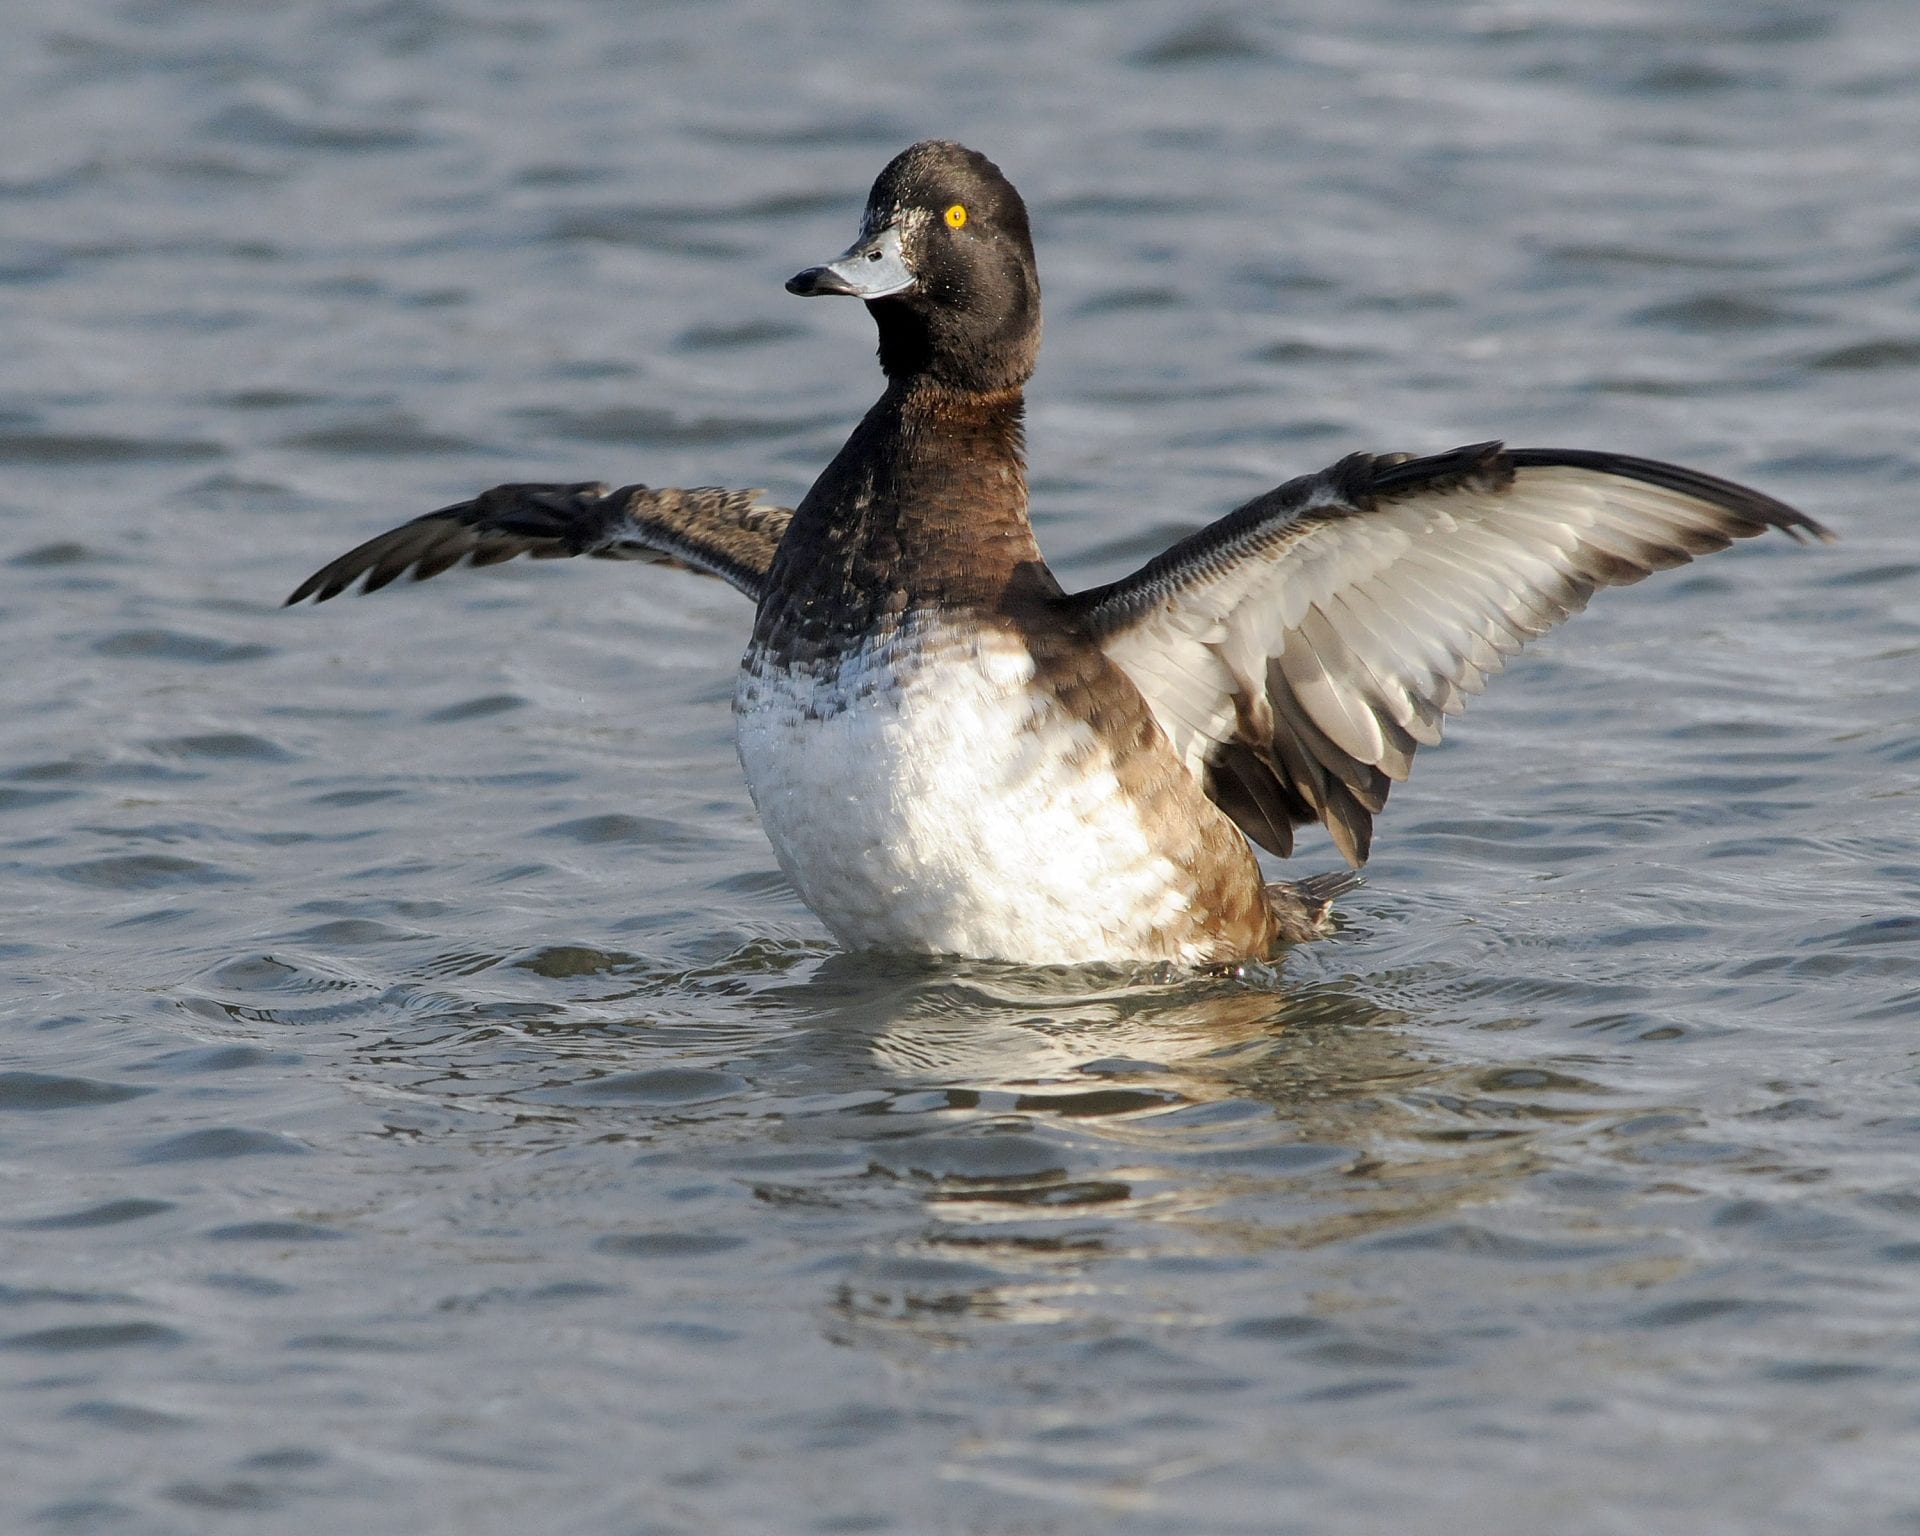 tufted-duck-on-water-stretching-wings